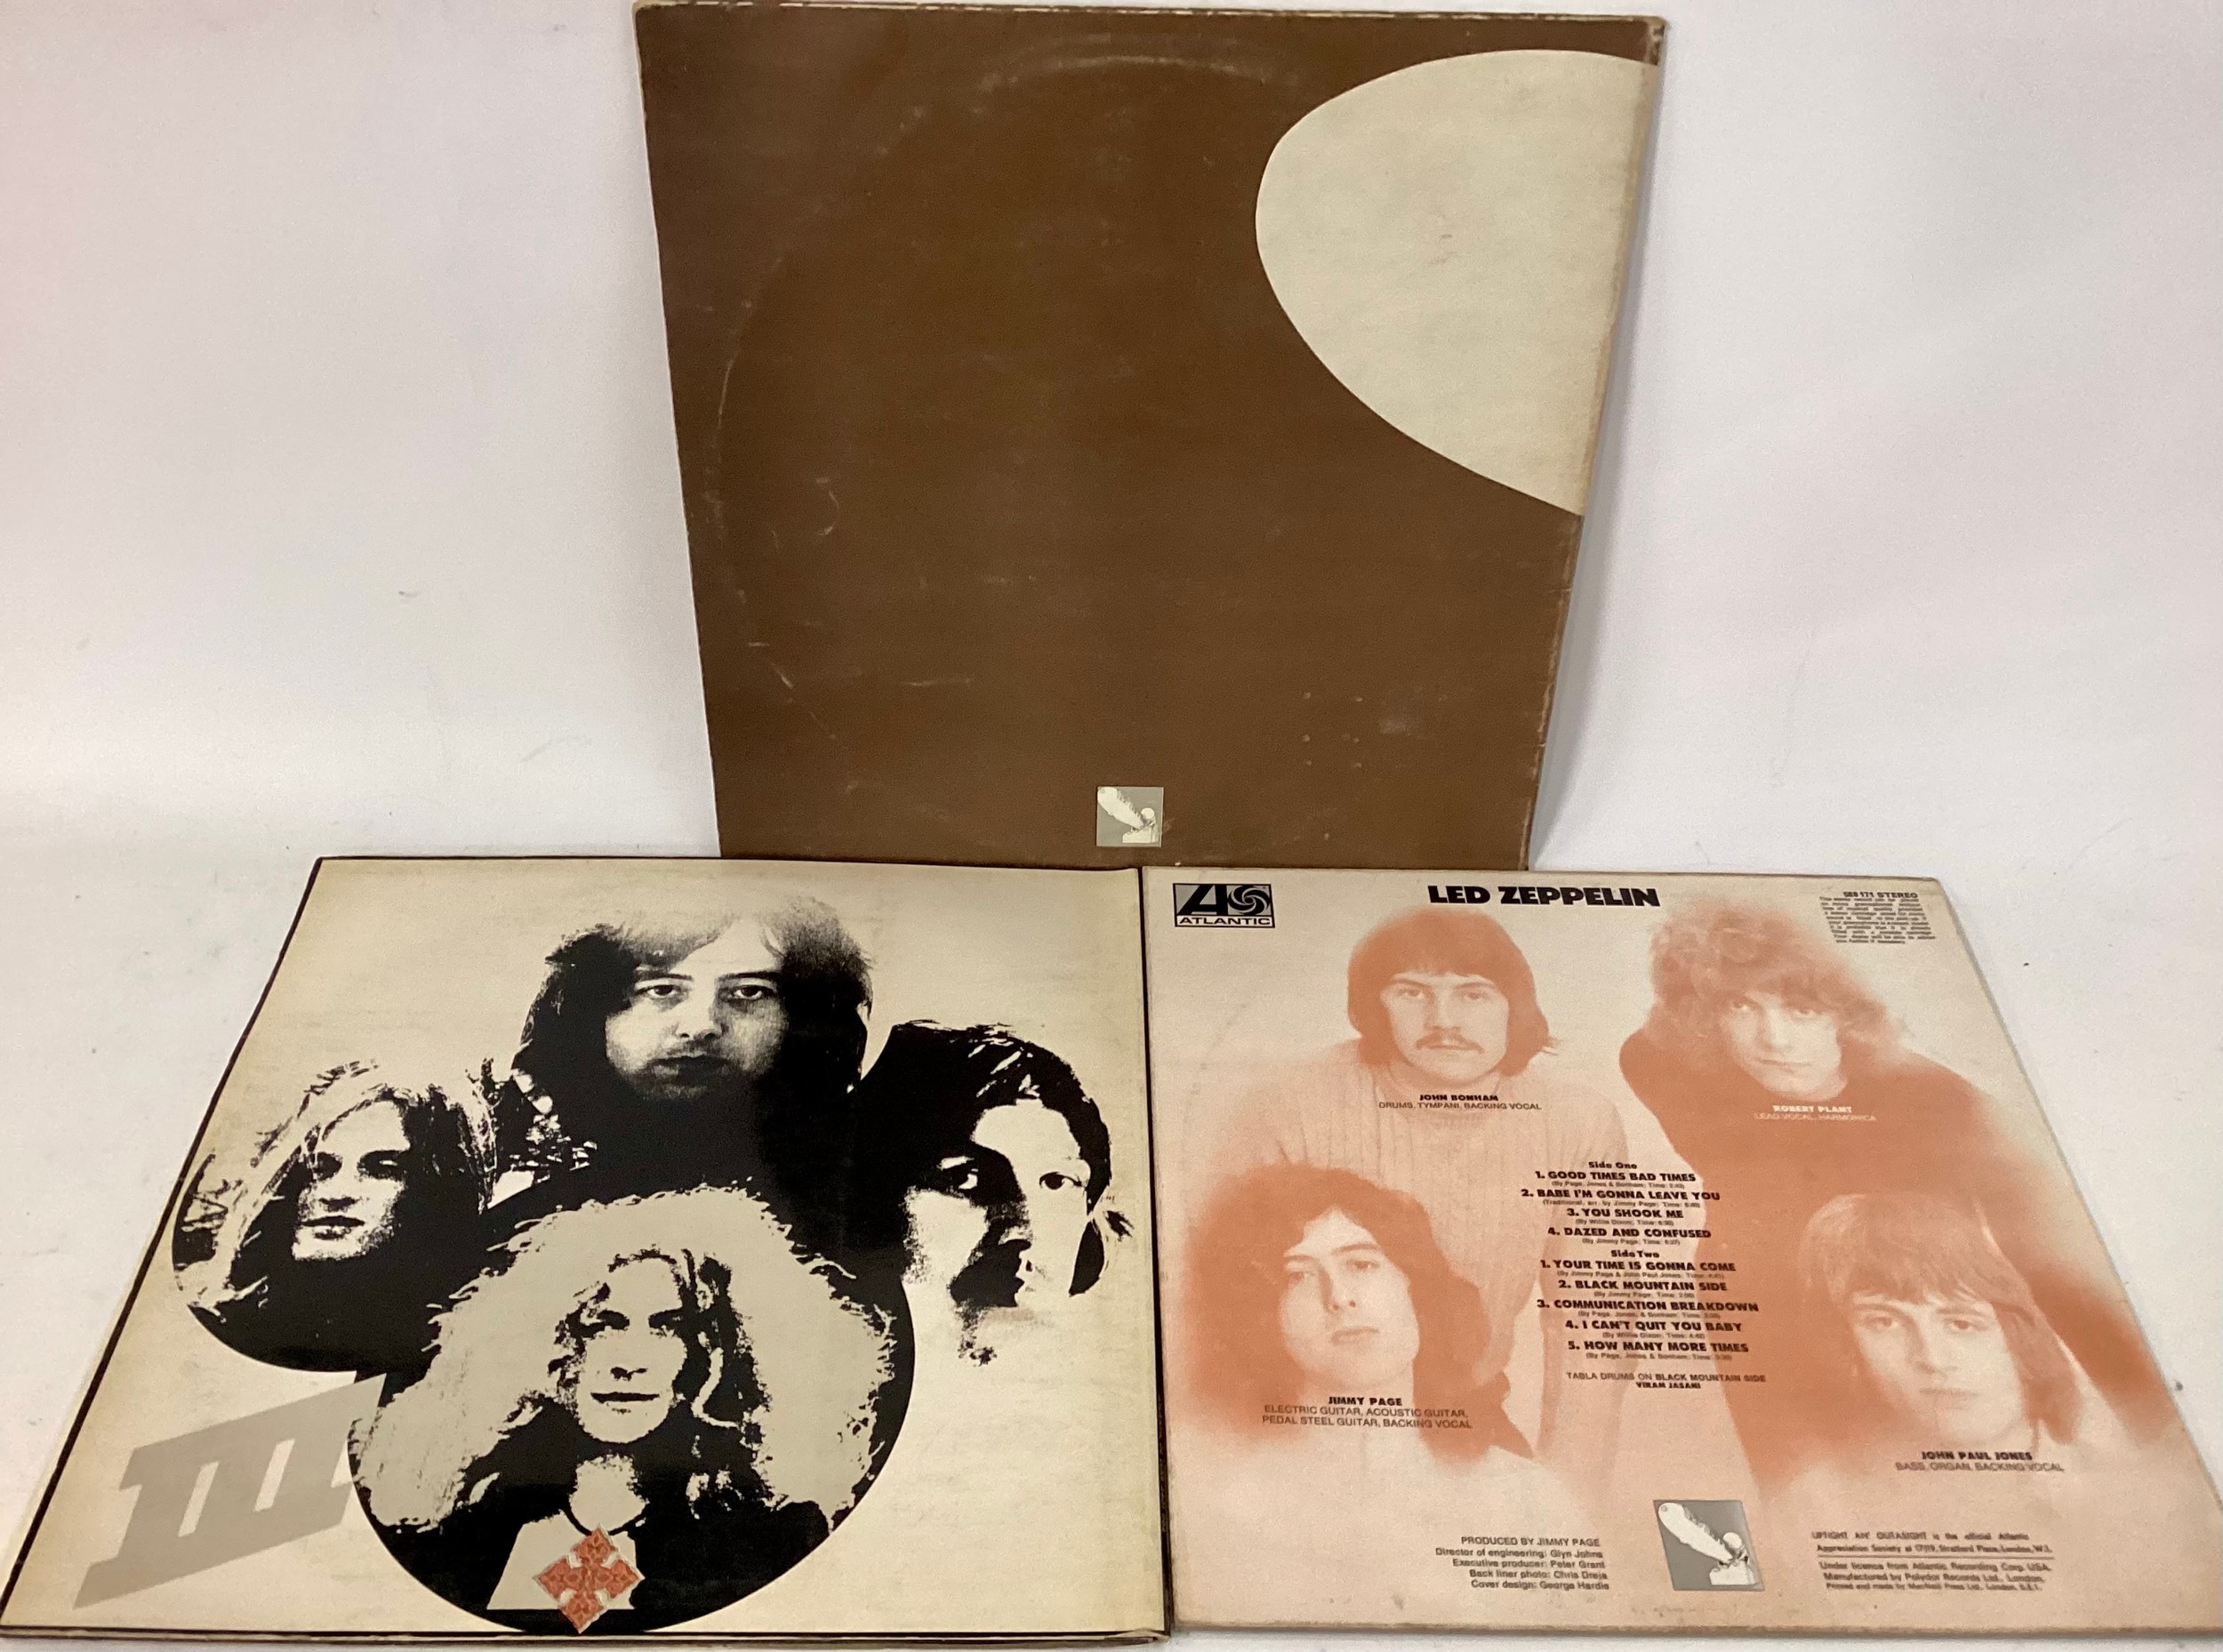 LED ZEPPELIN 1 / 2 & 3 PLUM LABEL VINYL ALBUMS. First we have a copy of their first album On - Image 2 of 7